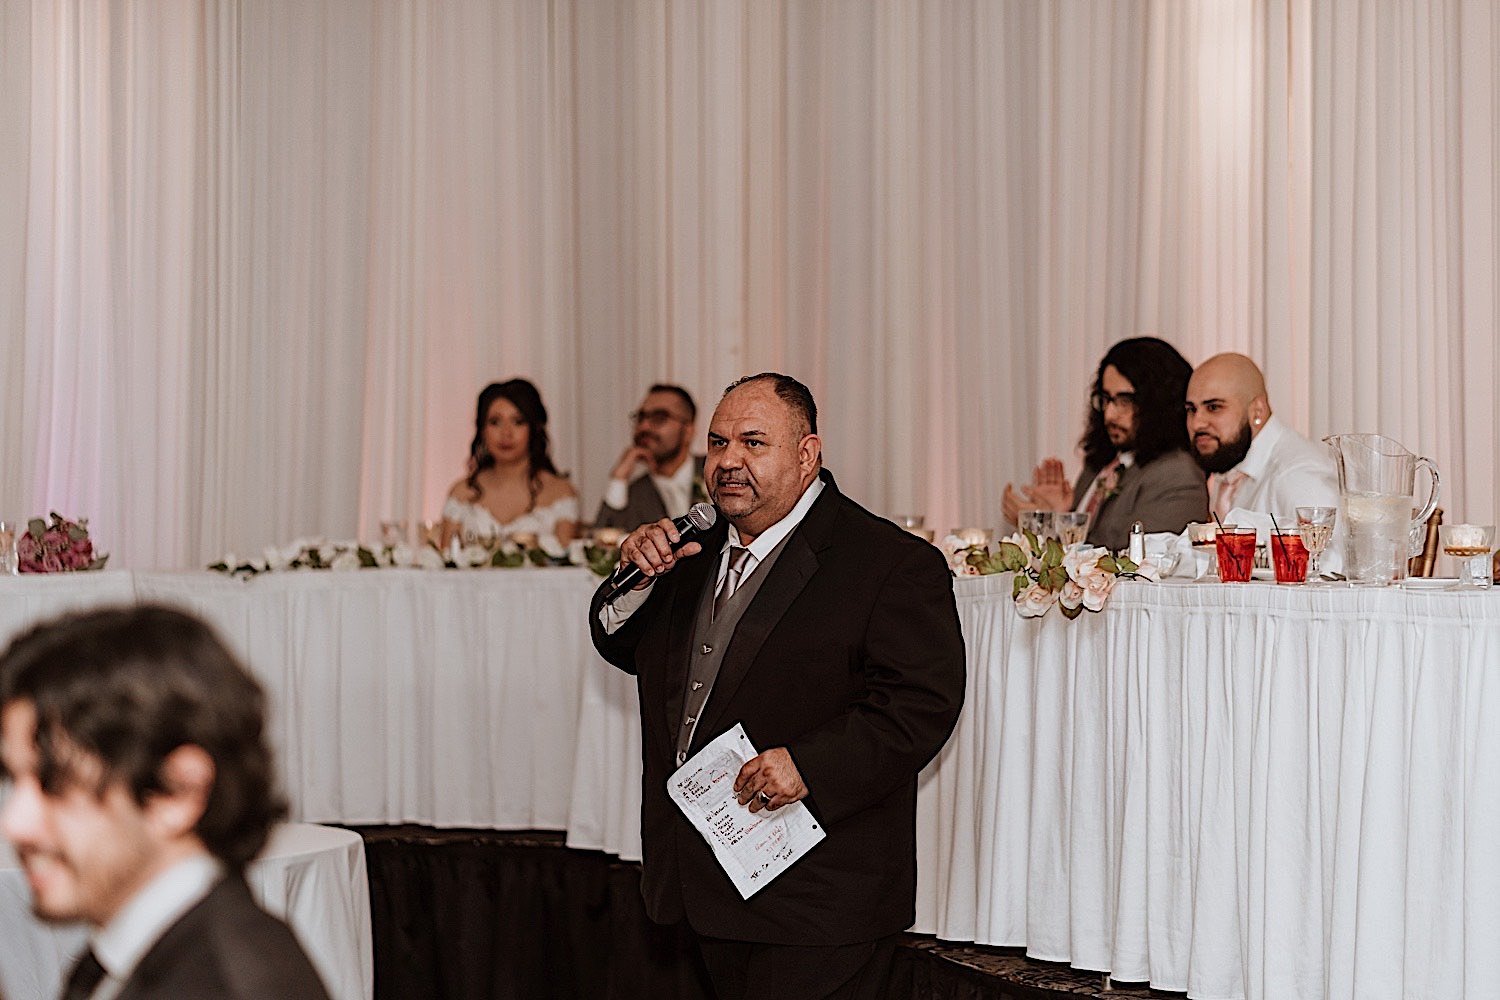 Man gives a toast during Chicagoland ballroom wedding reception with the bride and groom behind him